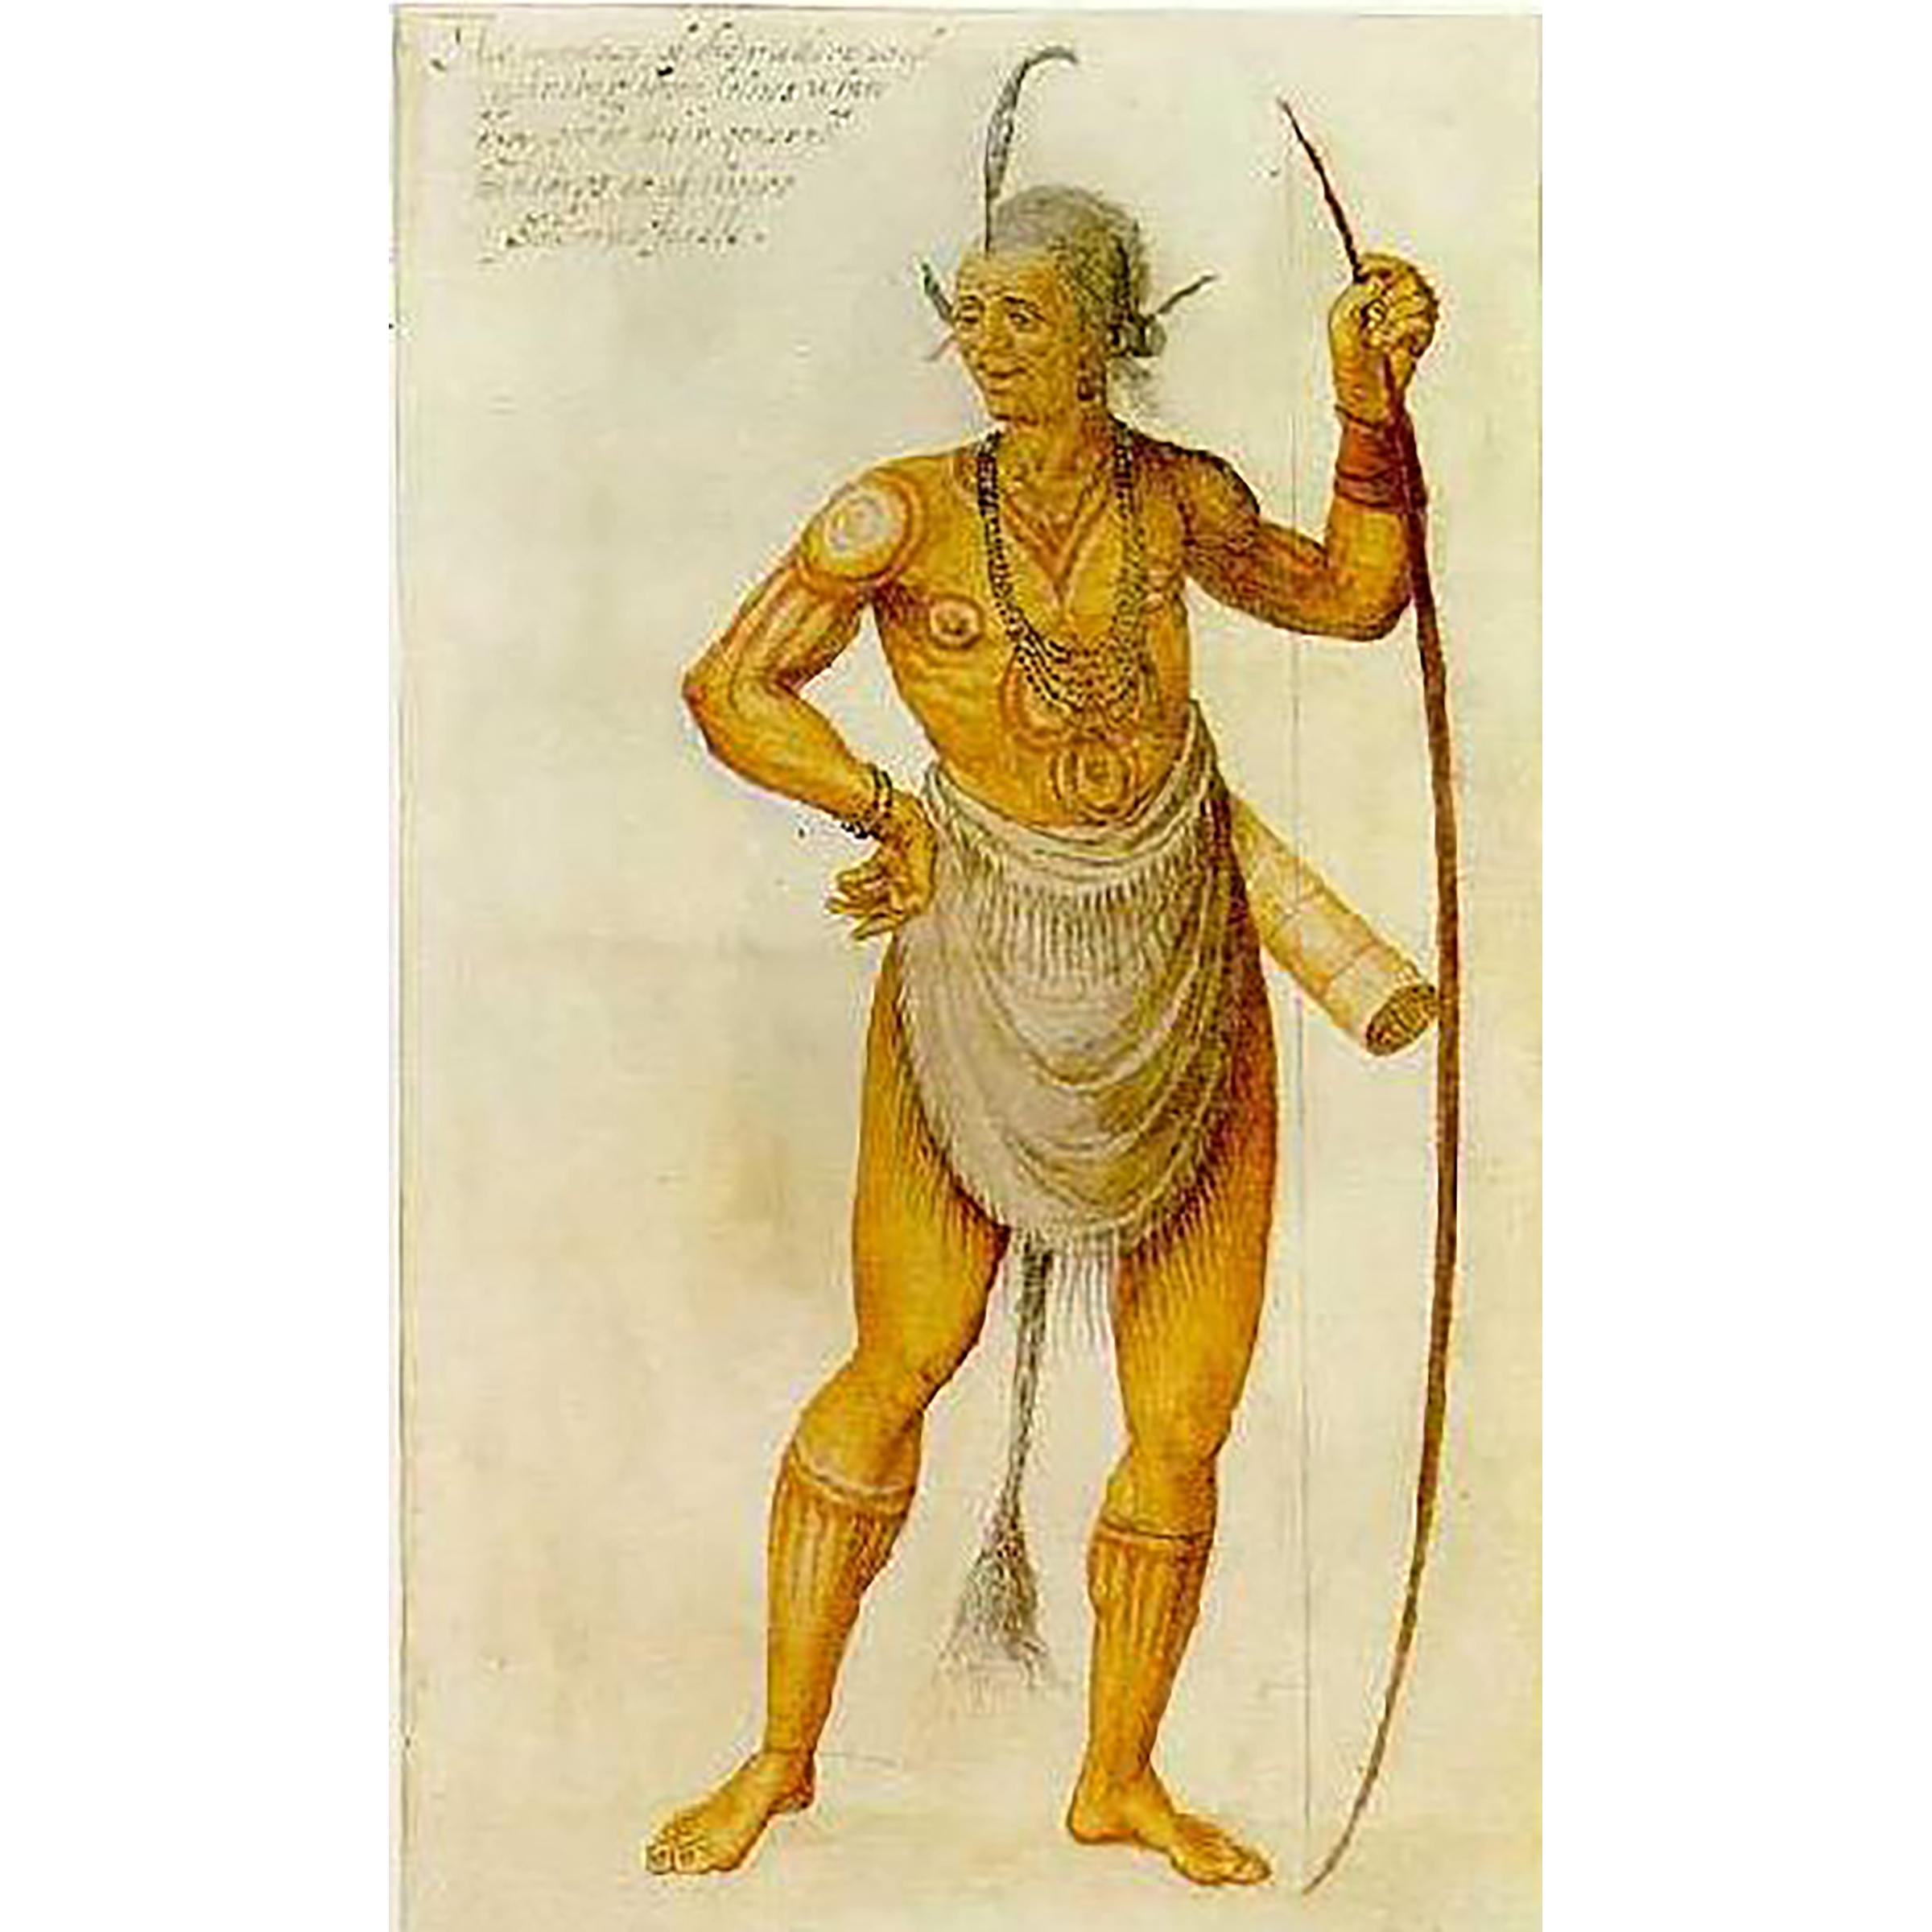 A 16th century painting of a Chesapeake Bay warrior by John White; this painting was adapted to represent Opechancanough in John Smith's 